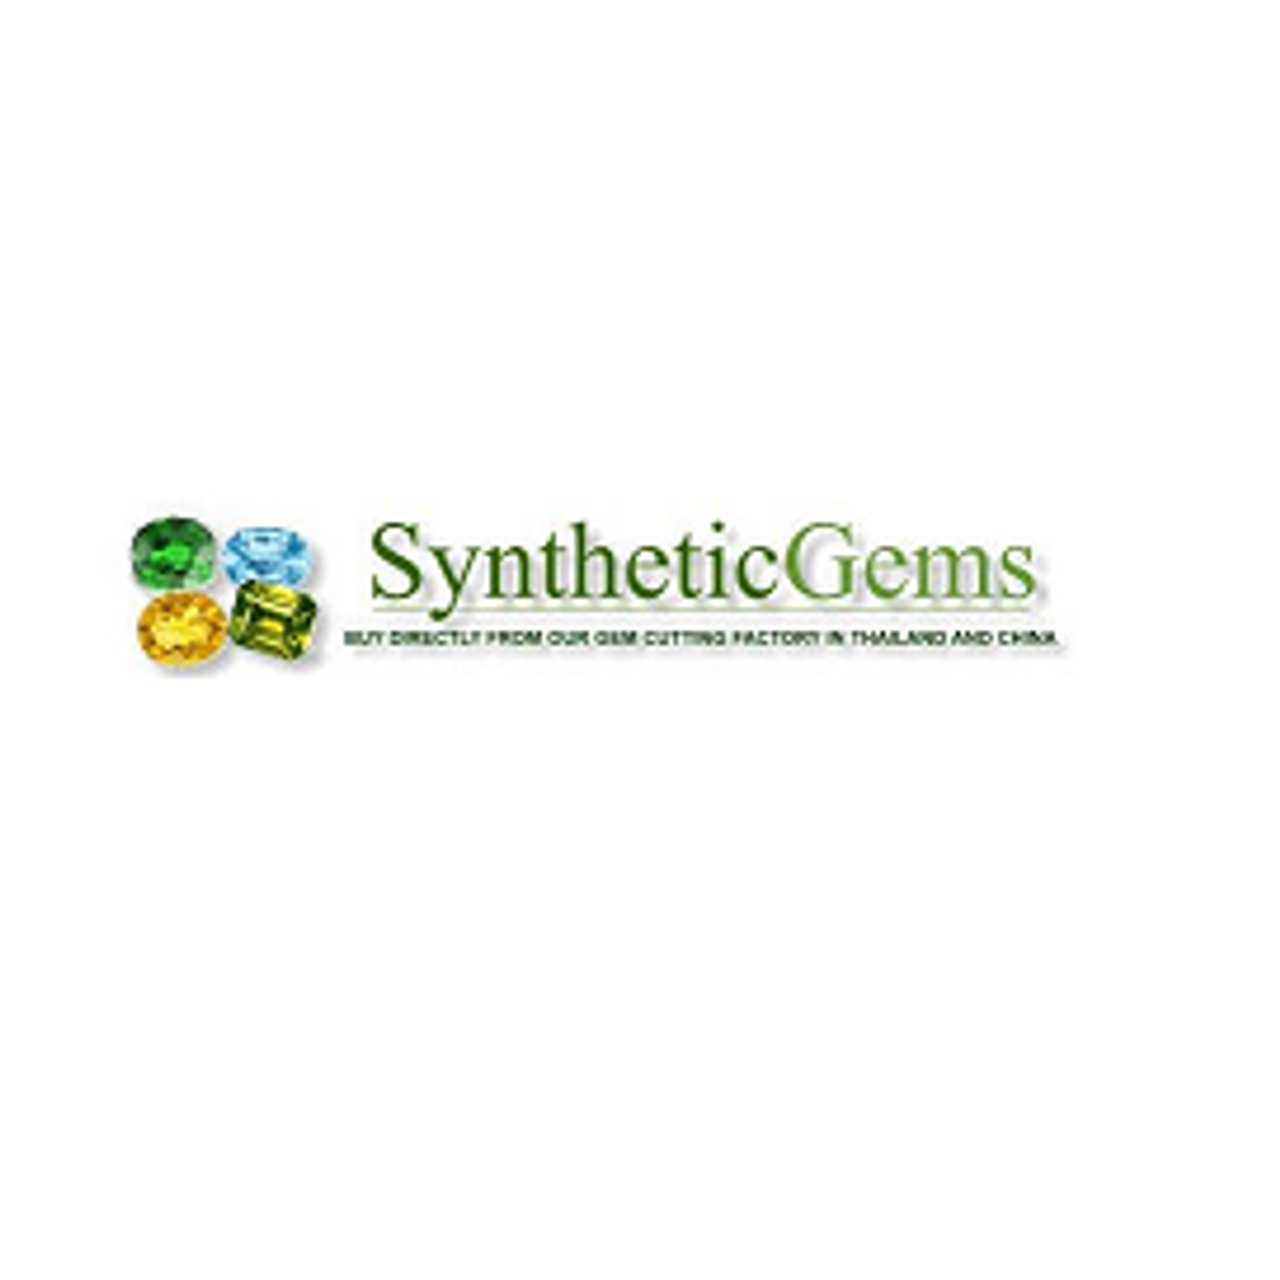 syntheticgems